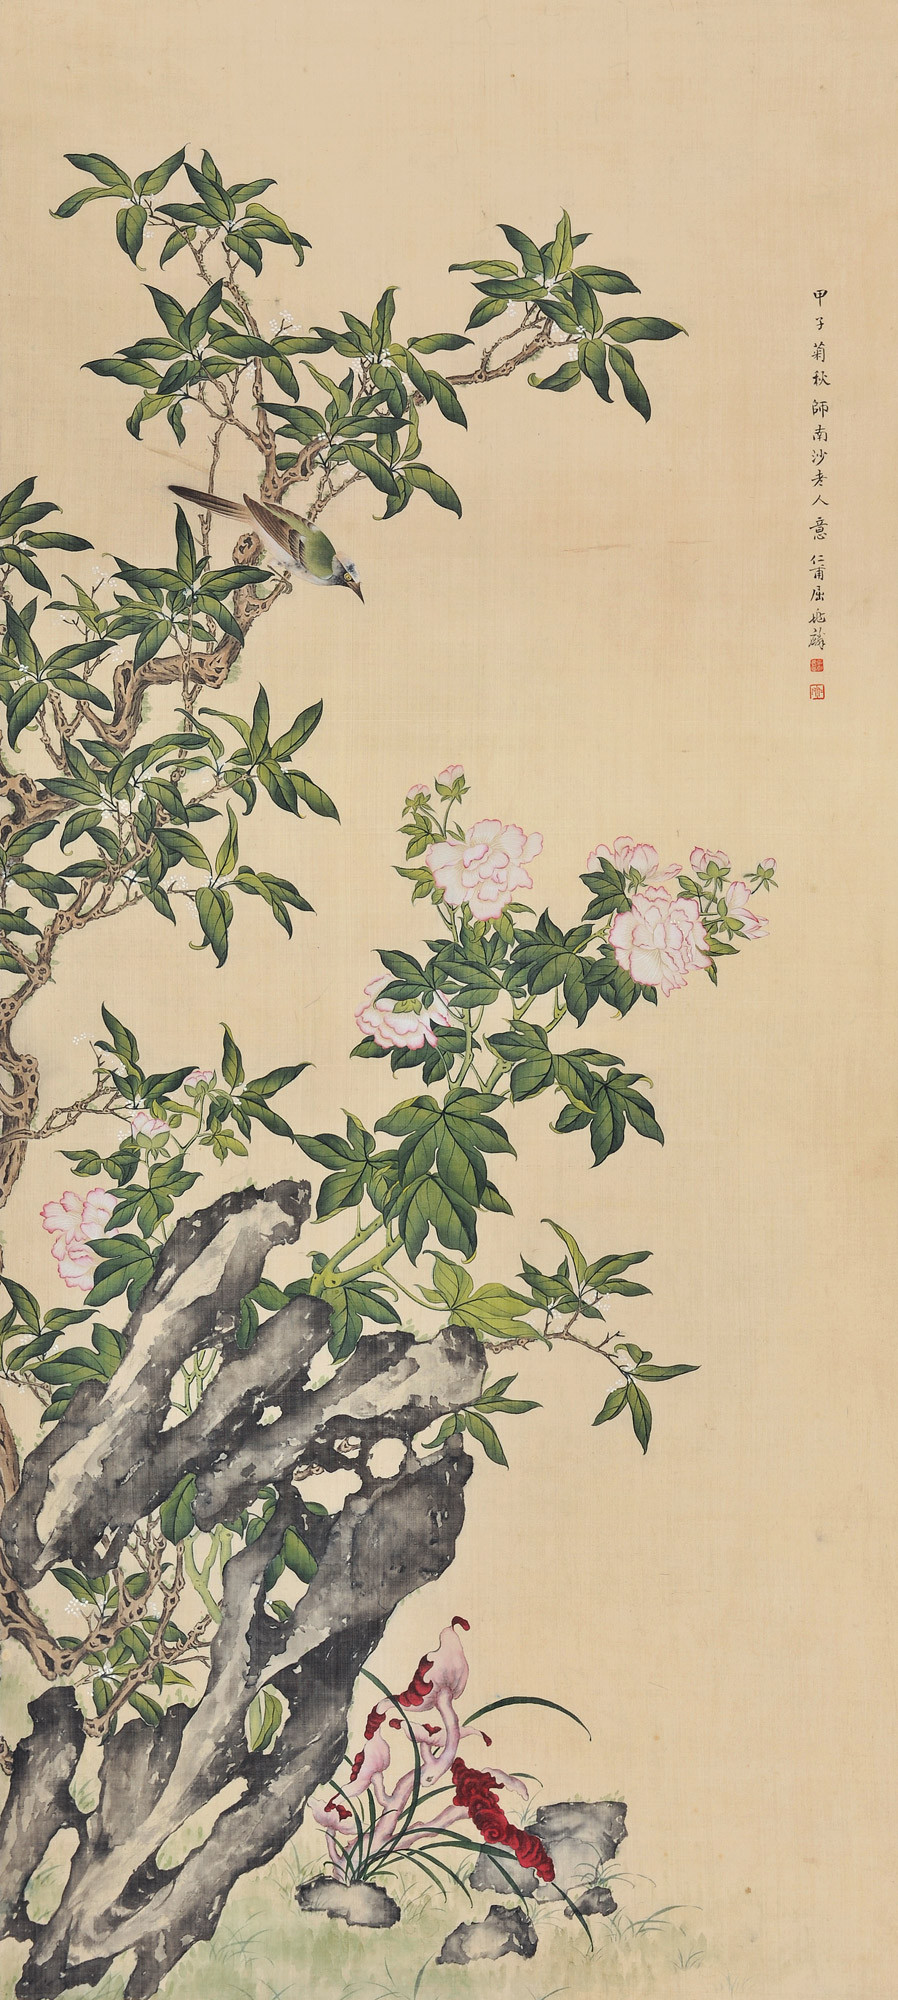 LANDSCAPE IN THE STYLE OF JIANG TINGXI